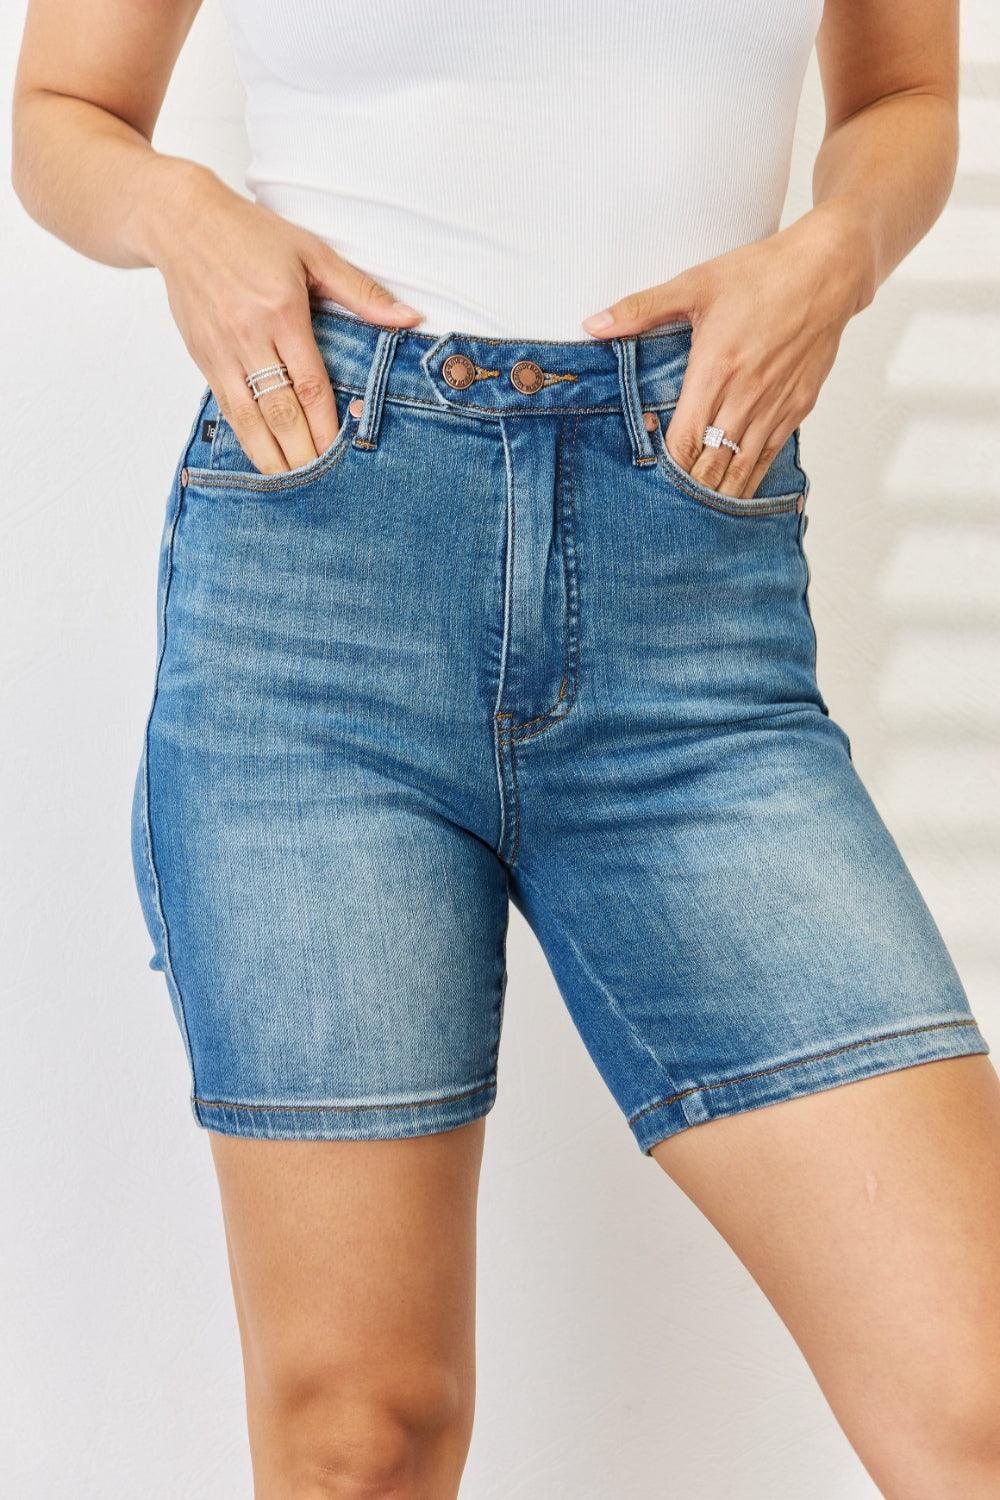 Judy Blue Full Size Tummy Control Double Button Bermuda Denim Shorts - God's Girl Gifts And Apparel